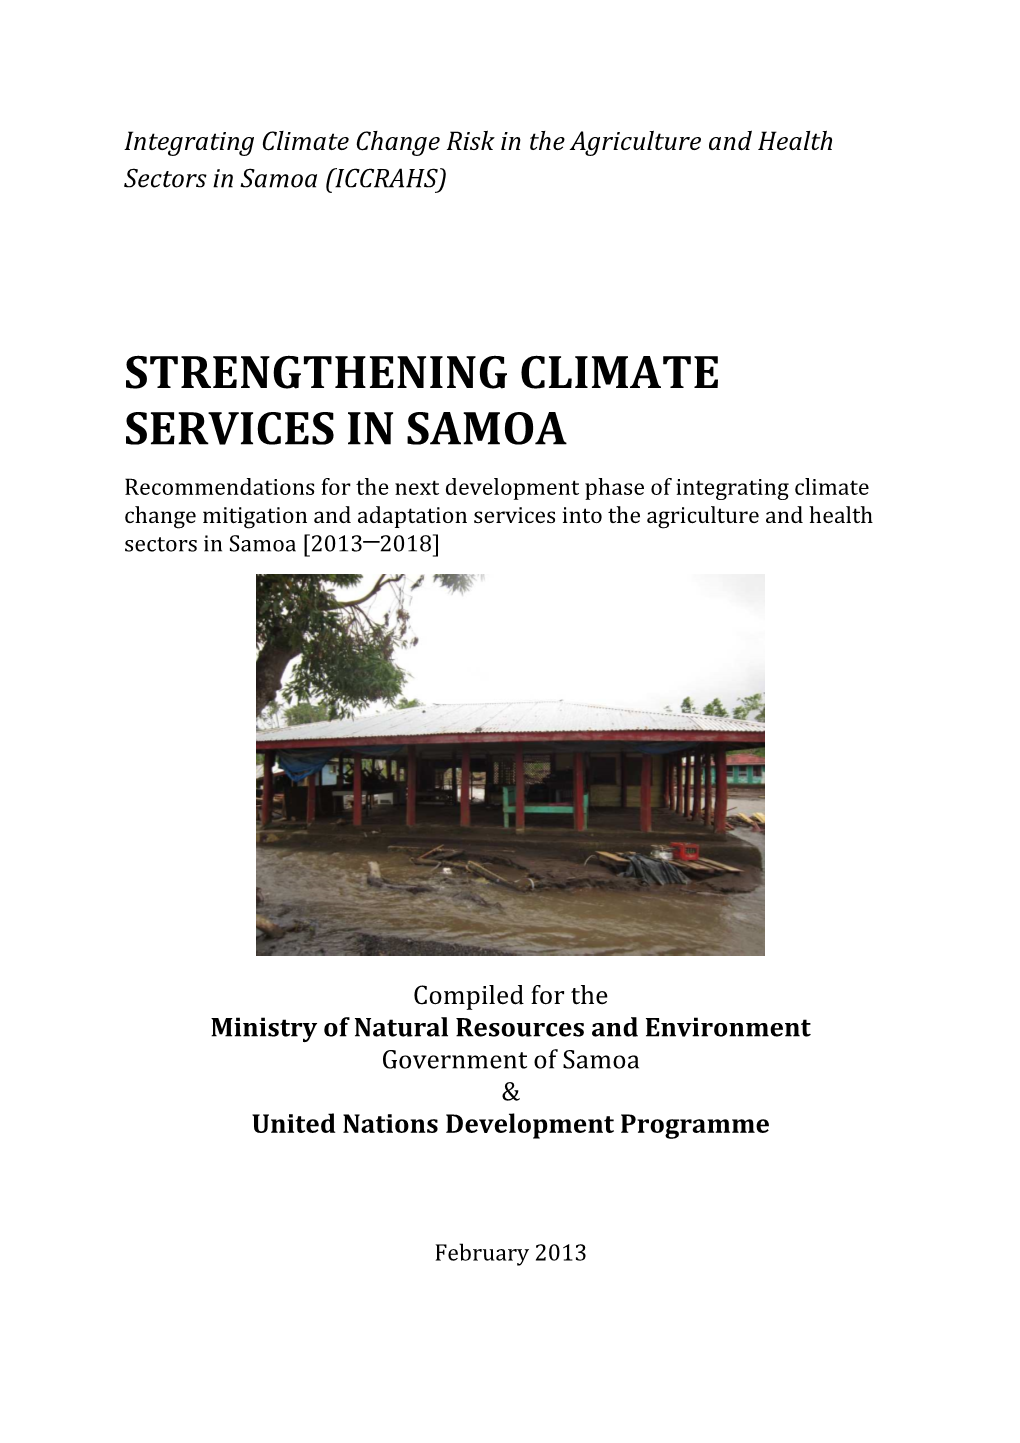 Strengthening Climate Services in Samoa FINAL